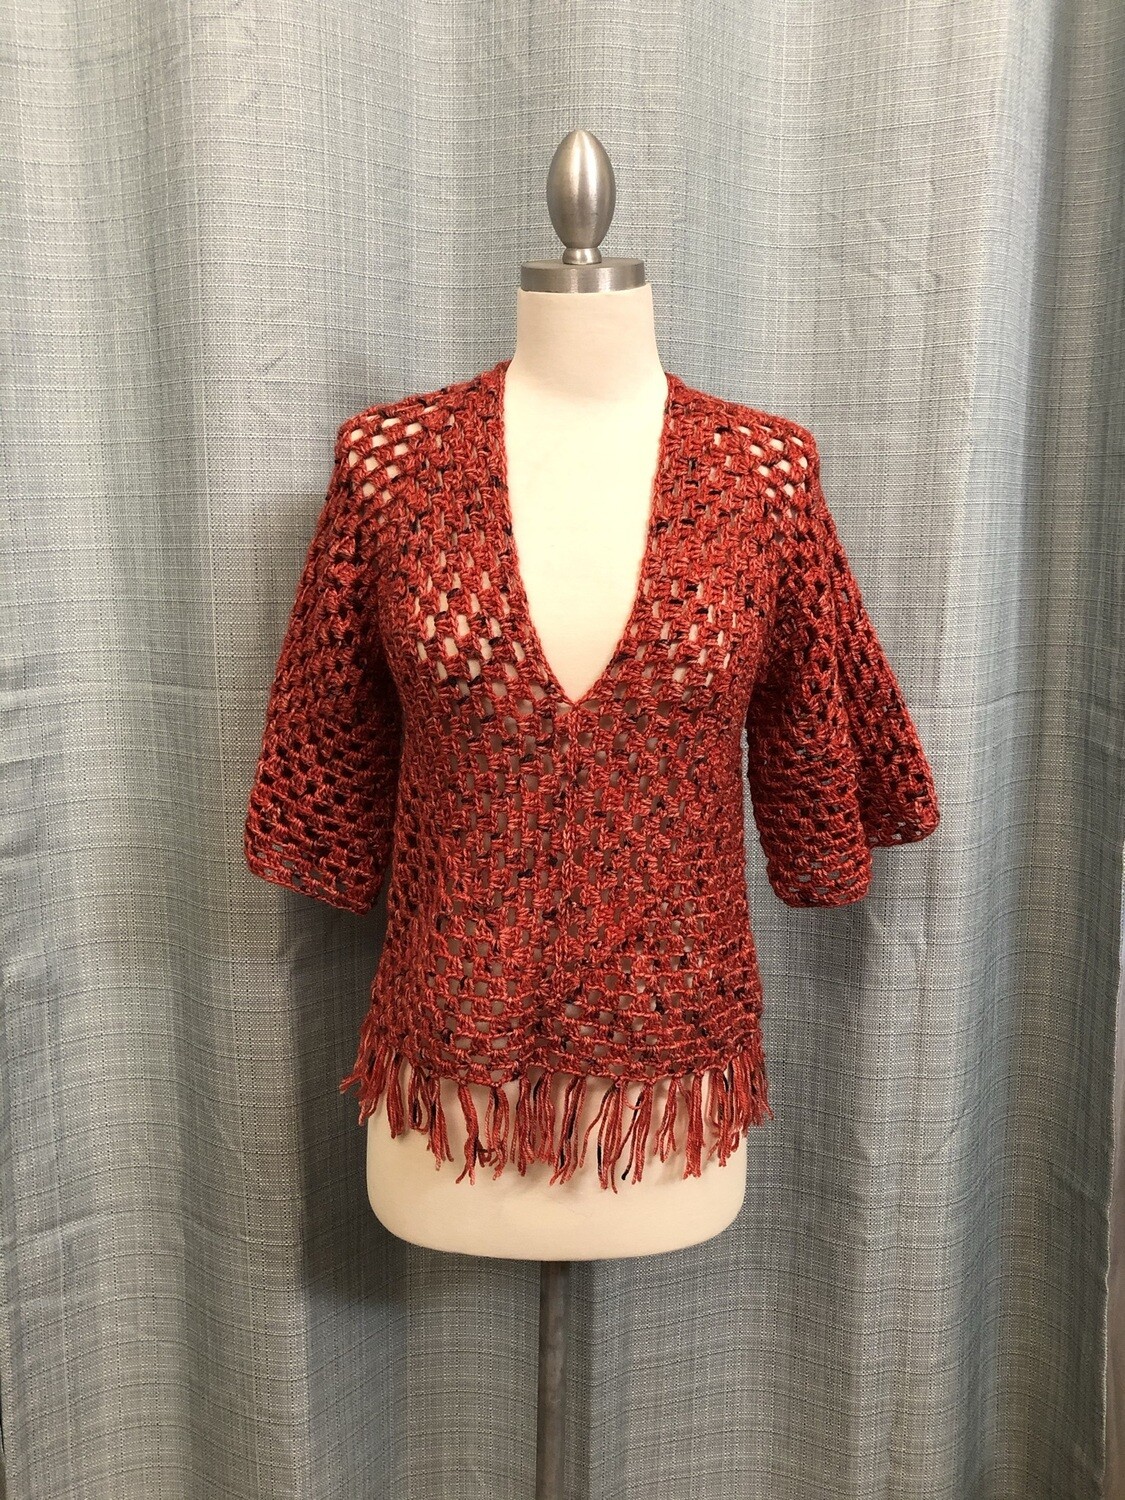 Orange, black dots with fringes Crocheted Blouse Size S